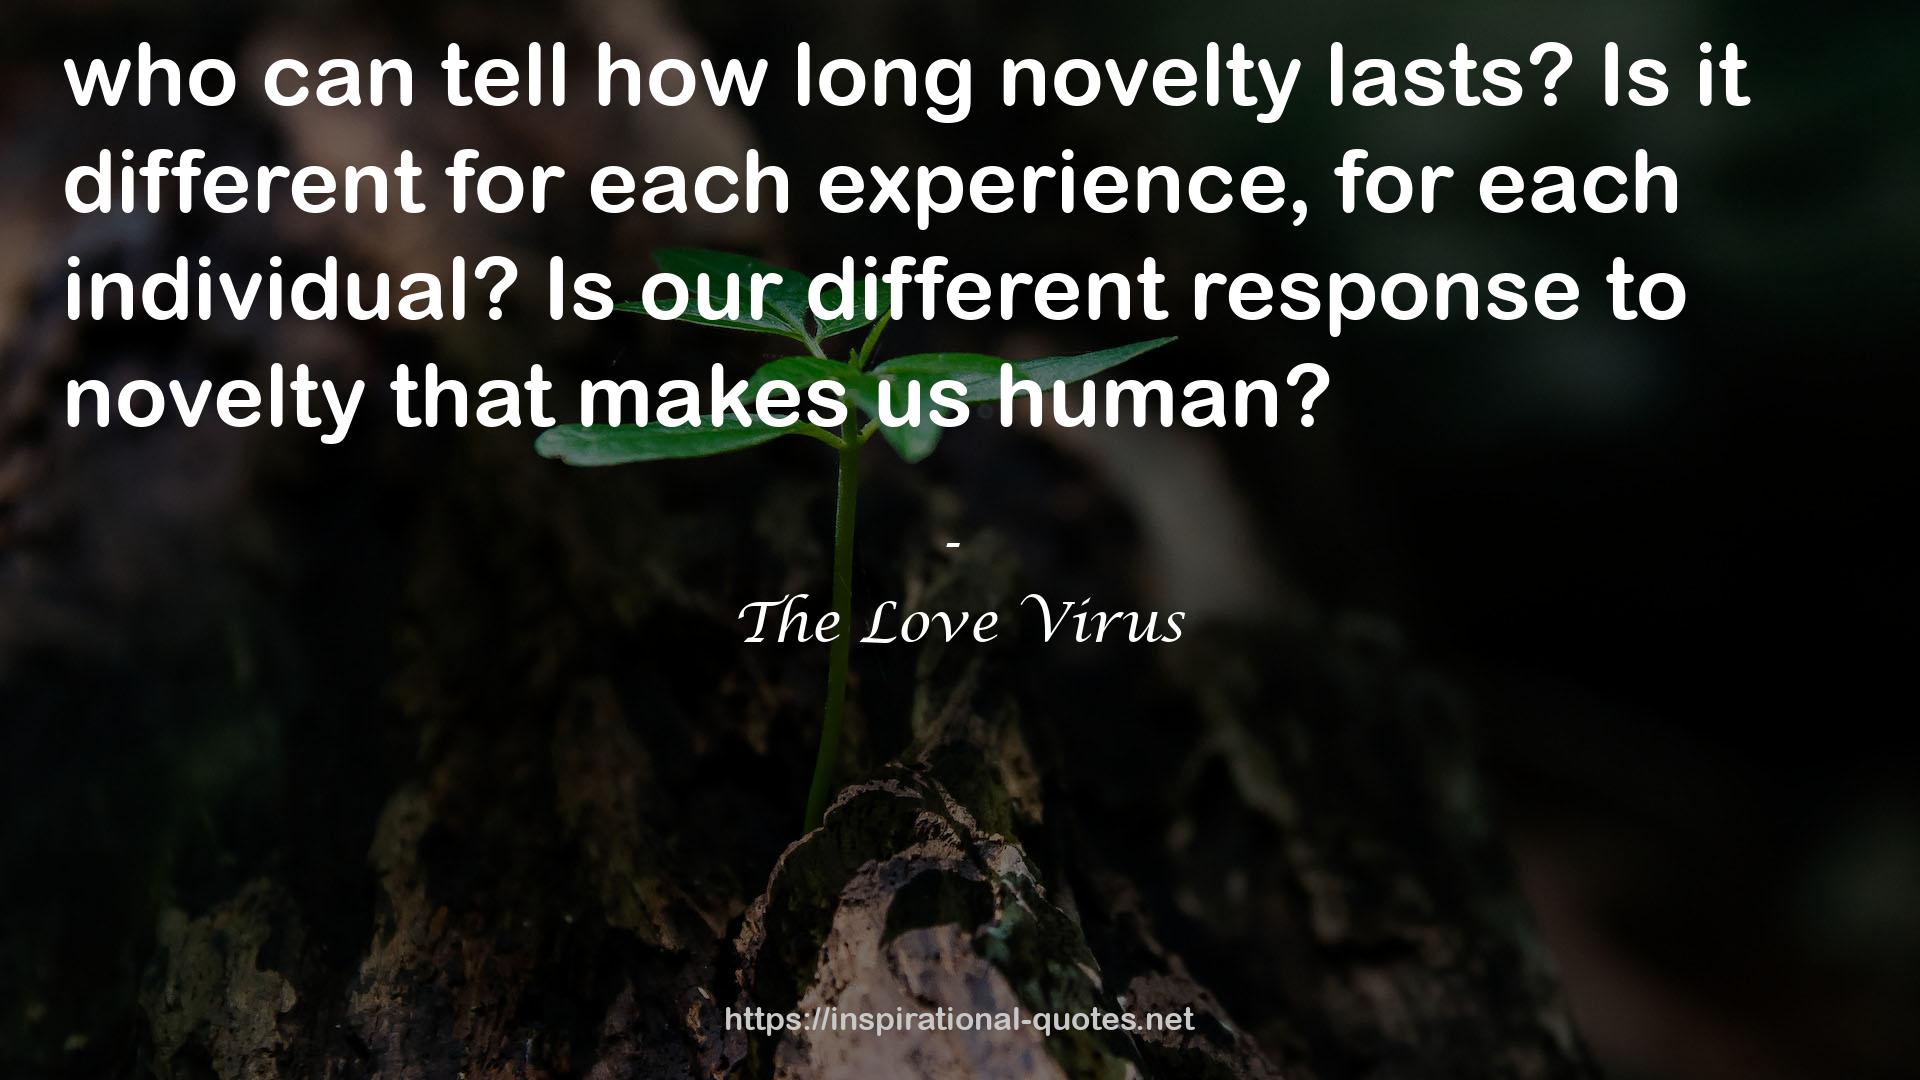 The Love Virus QUOTES